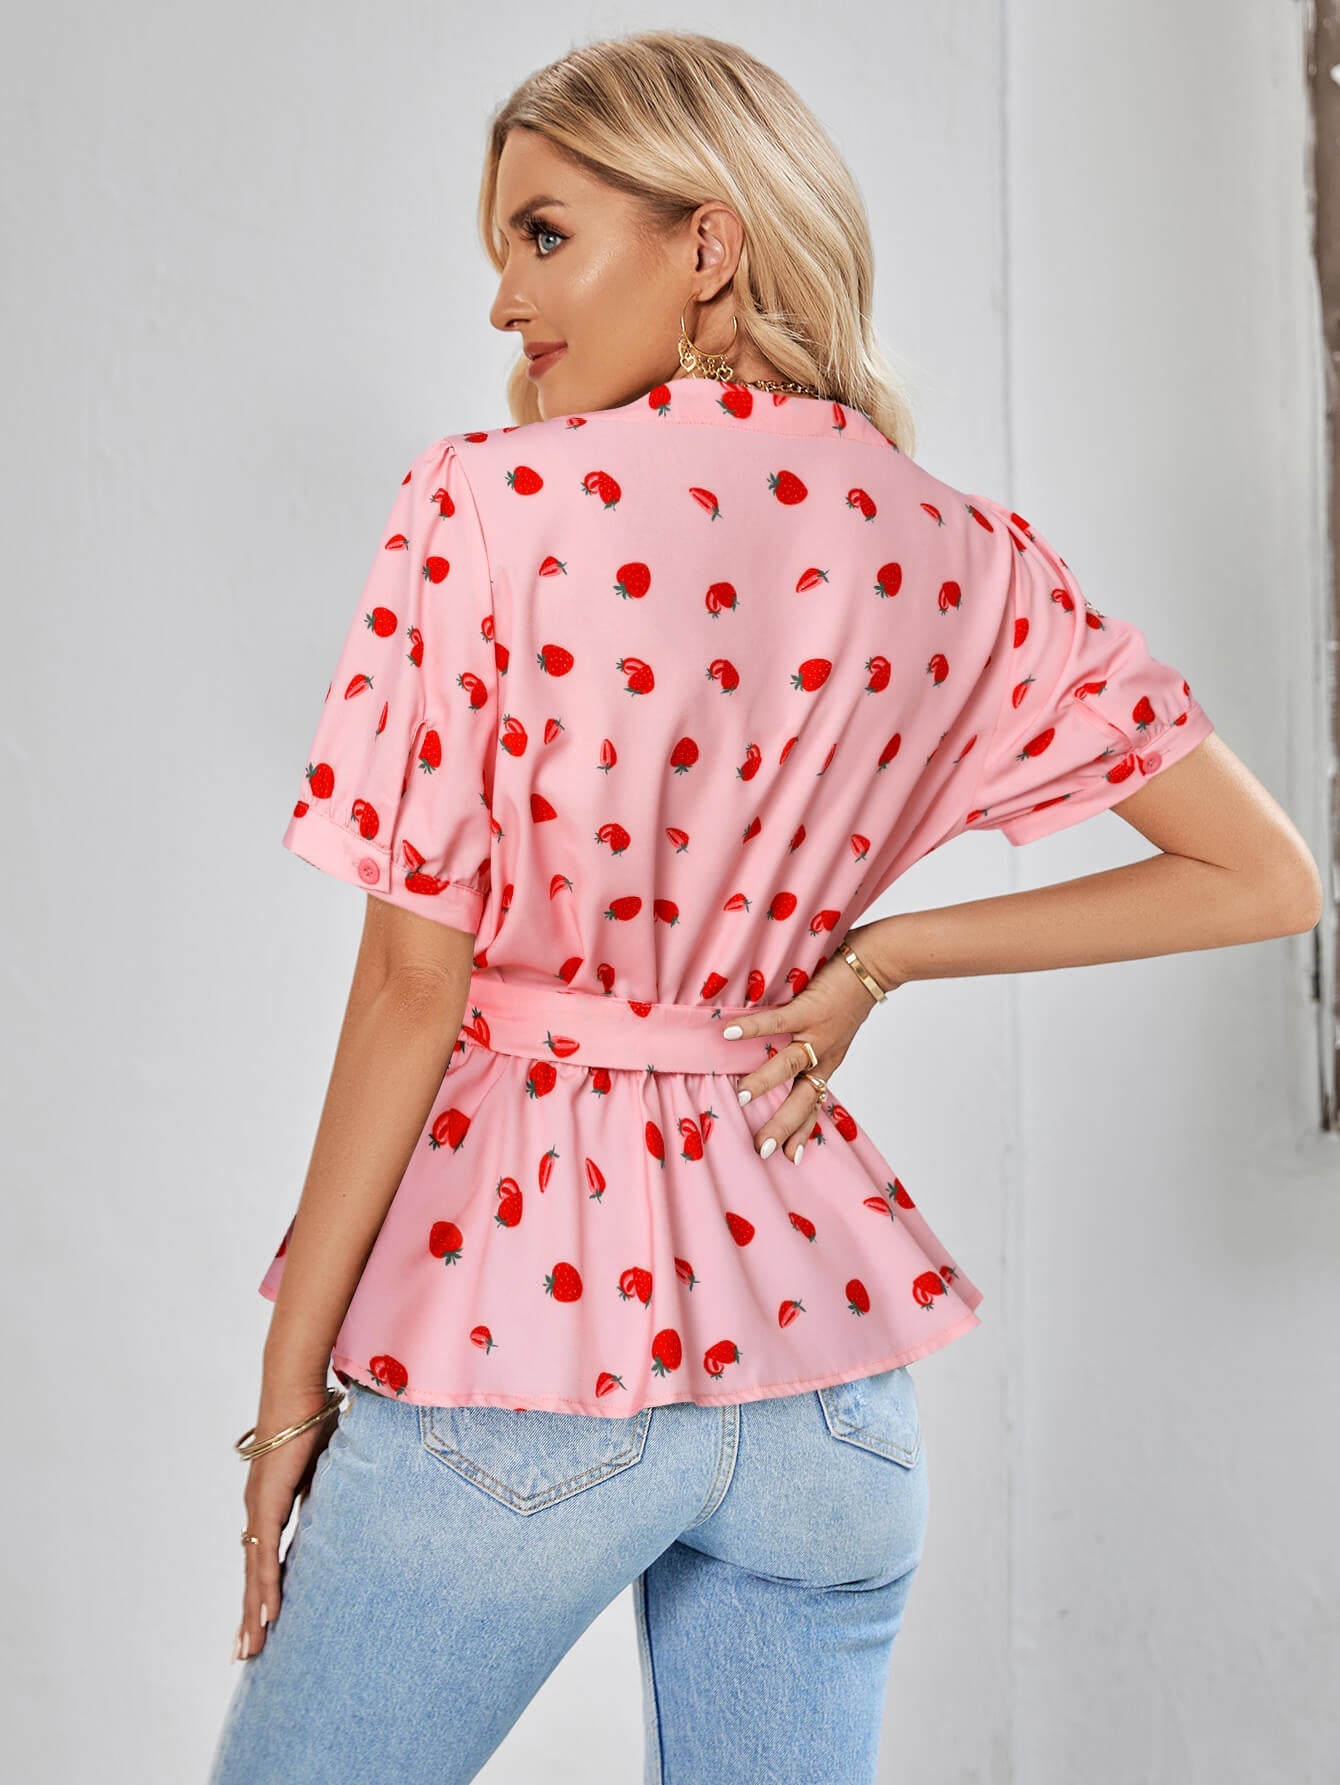 MARLOW FRONT TIE BUTTON UP TOP - PINK